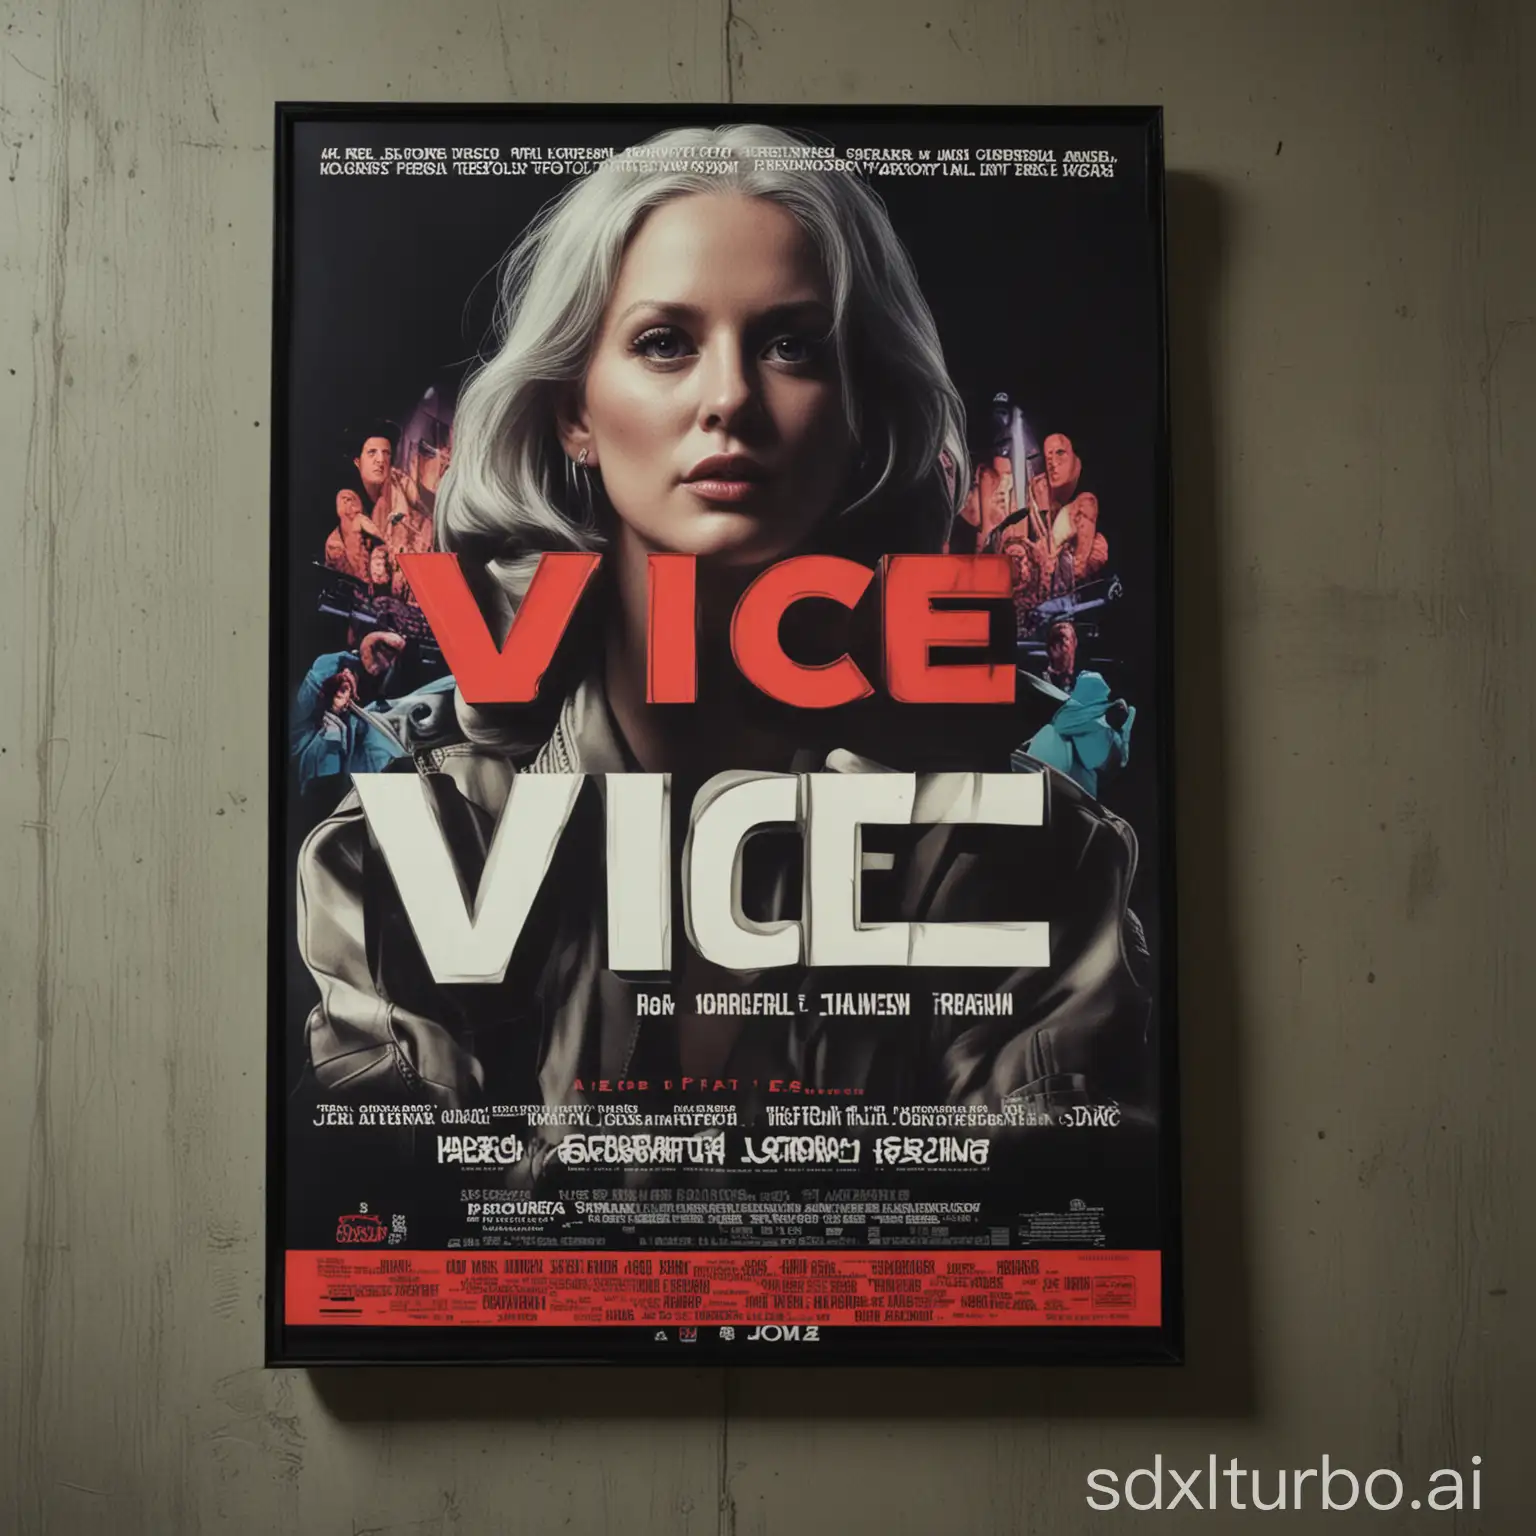 a movie trailer poster in a vice